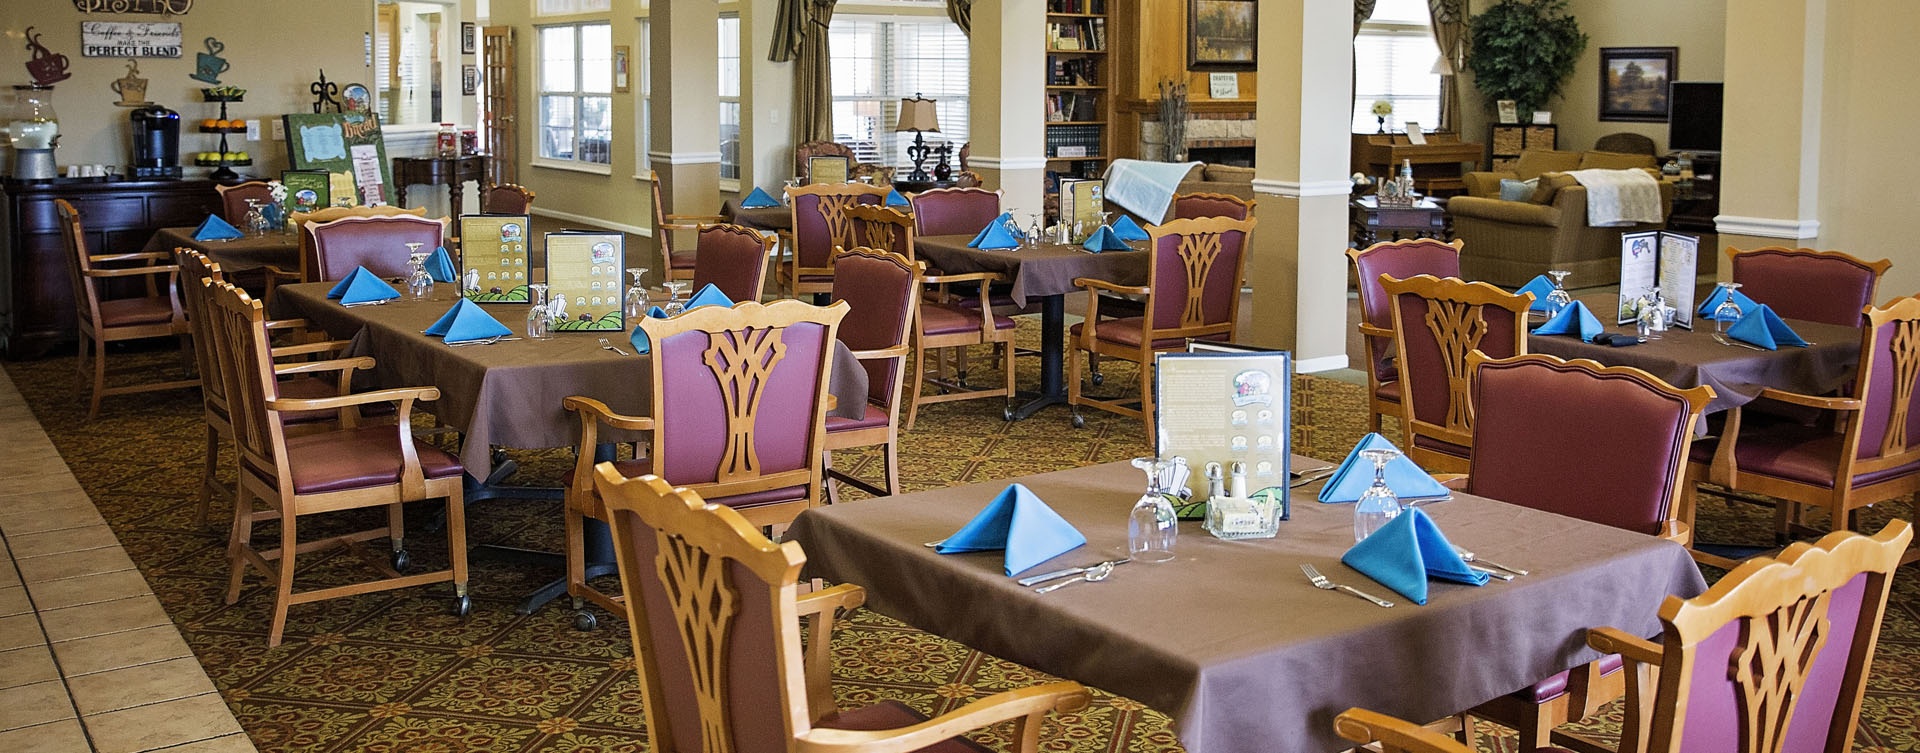 Enjoy homestyle food with made-from-scratch recipes in our dining room at Bickford of Grand Island